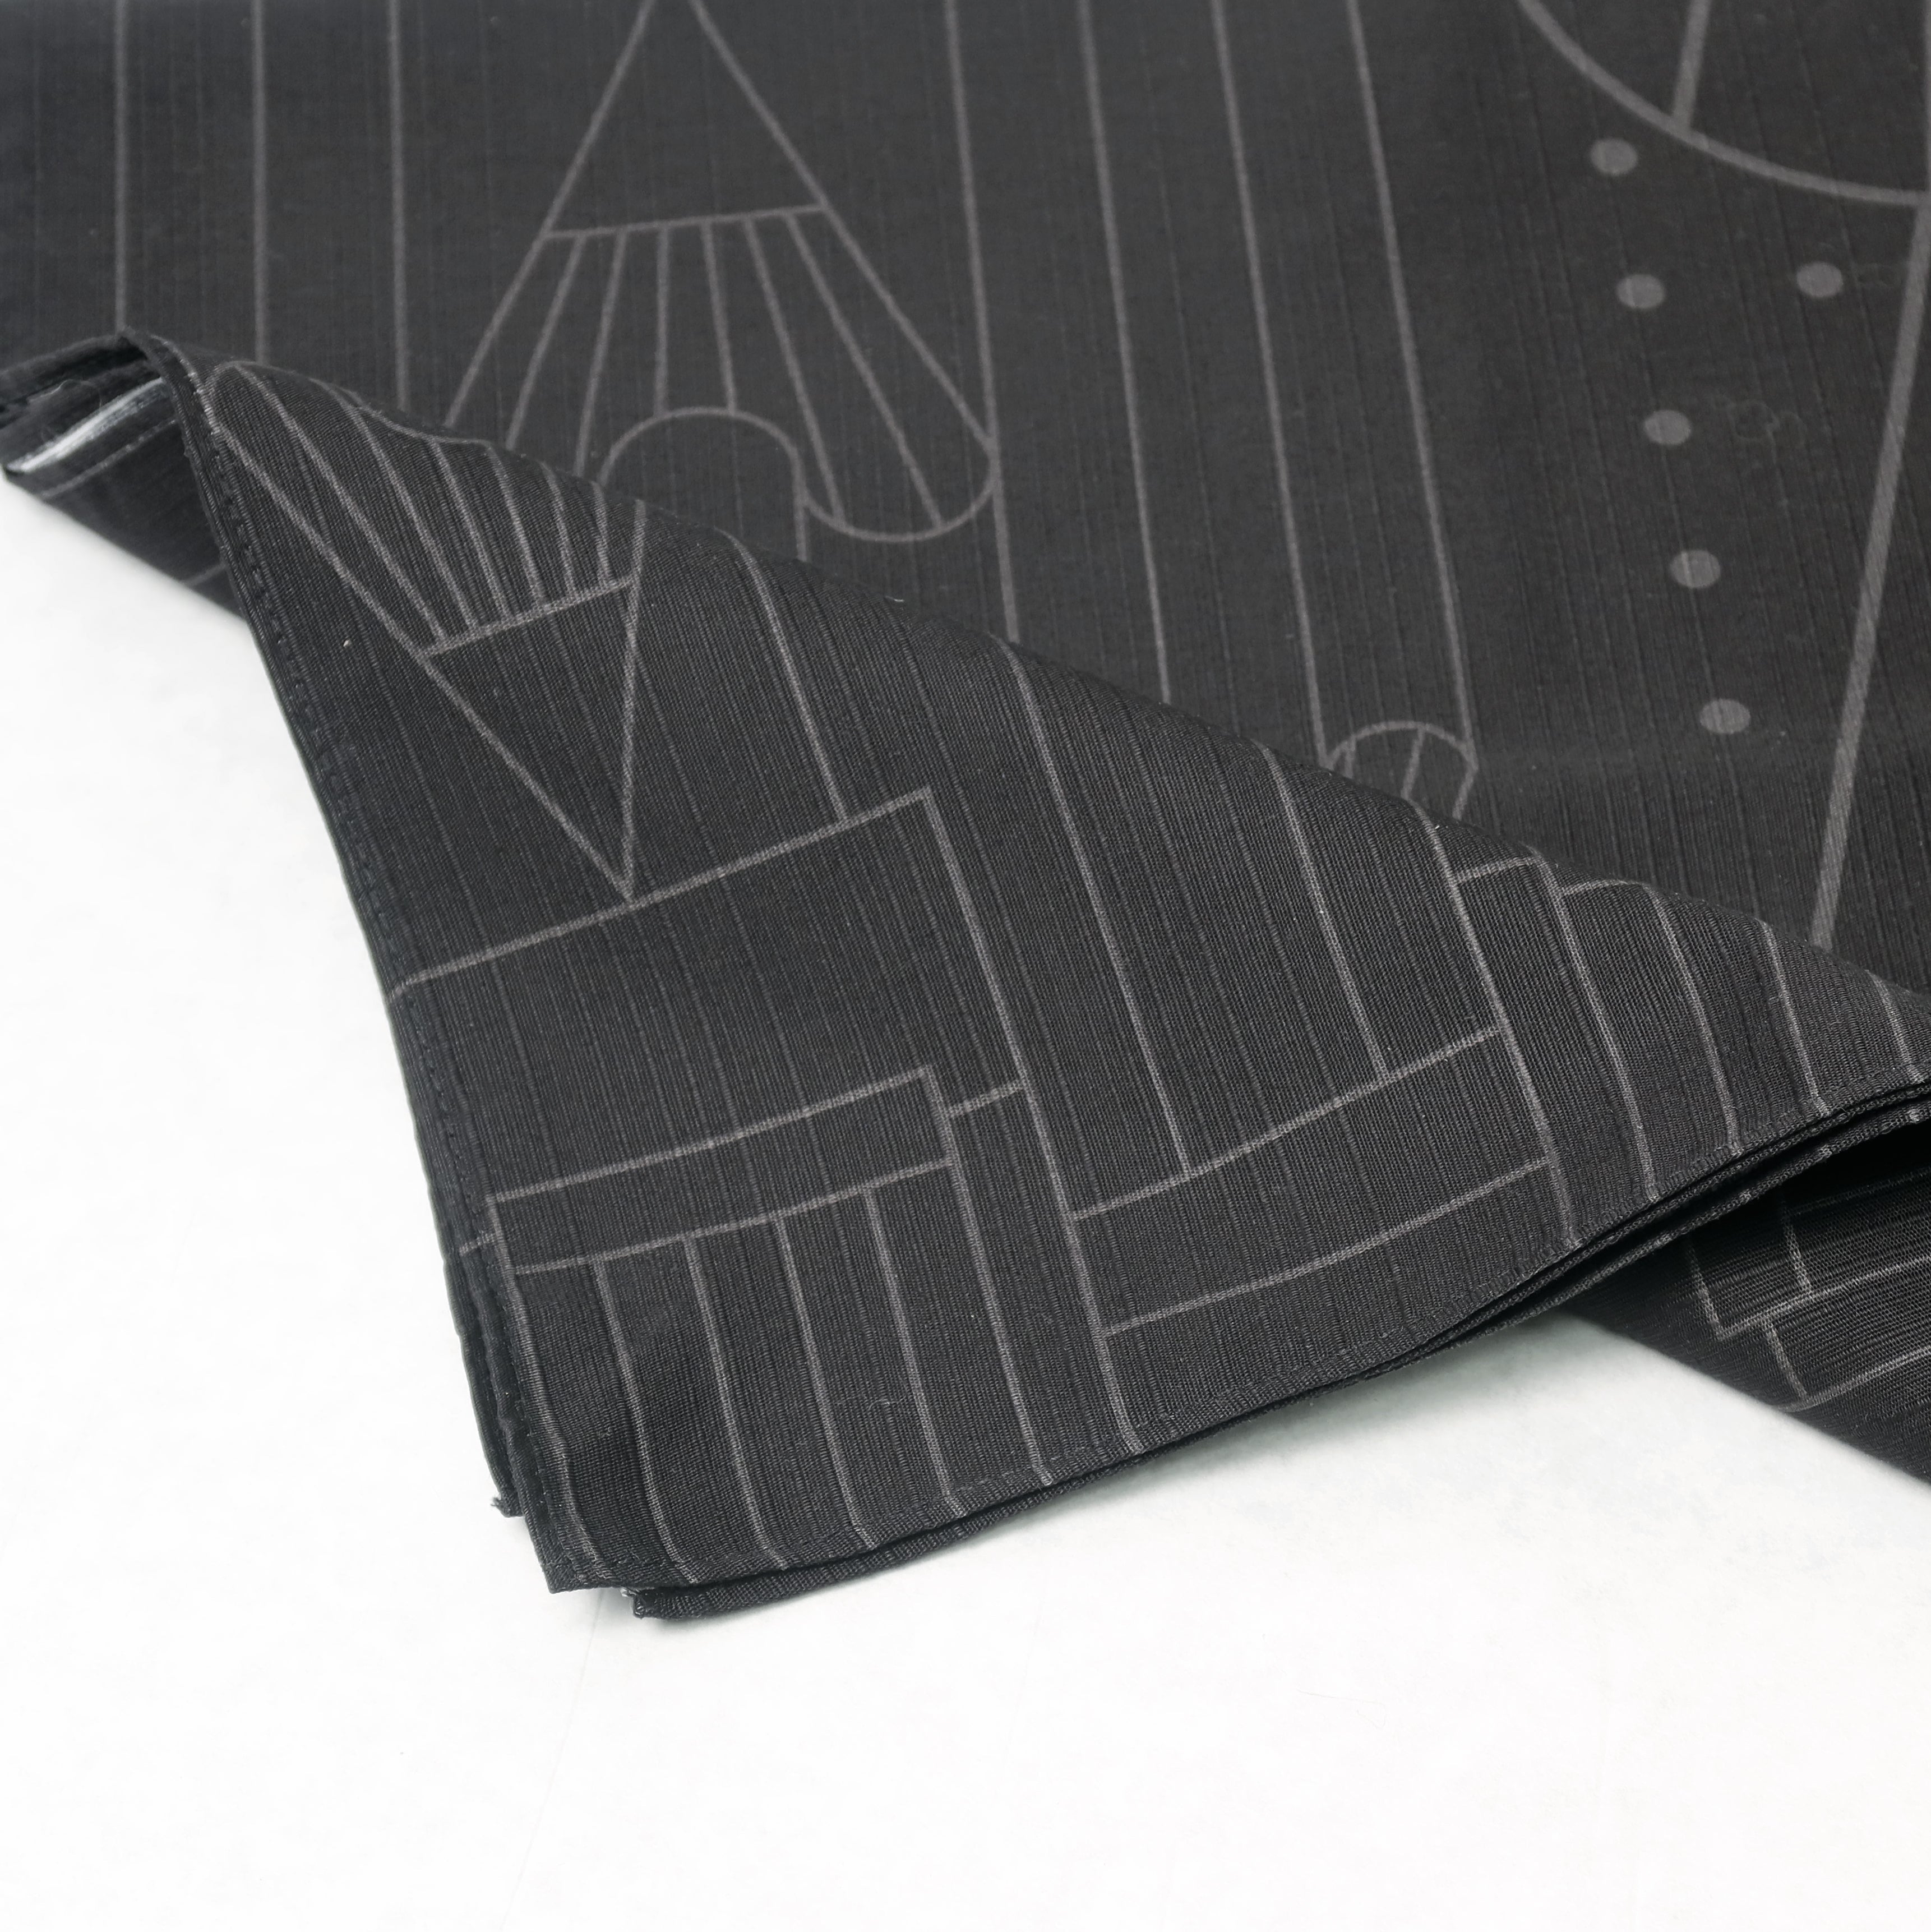 A Blackwing Furoshiki with a design on it, perfect for adding a touch of style to any outfit.